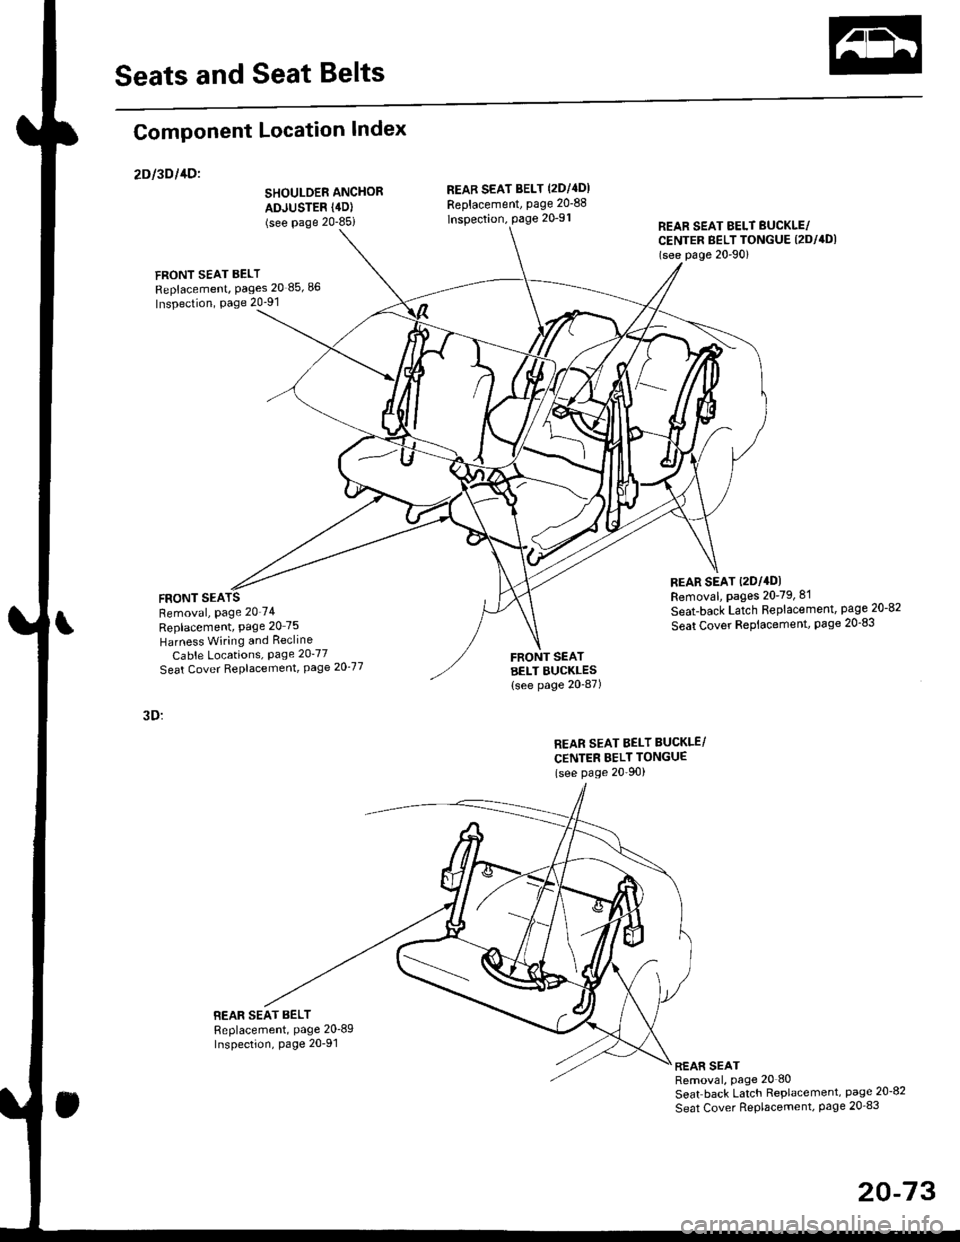 HONDA CIVIC 1998 6.G Workshop Manual Seats and Seat Belts
Component Location Index
2Dl3Dl1Dl
SHOULDER ANCHOR
ADJUSTER (4D)
(see Page 20-85i
FRONT SEAT BELT
Replacement, Pages 20 85,86
Inspection, Page 20-91
FRONT SEARemoval, Page 2074
R